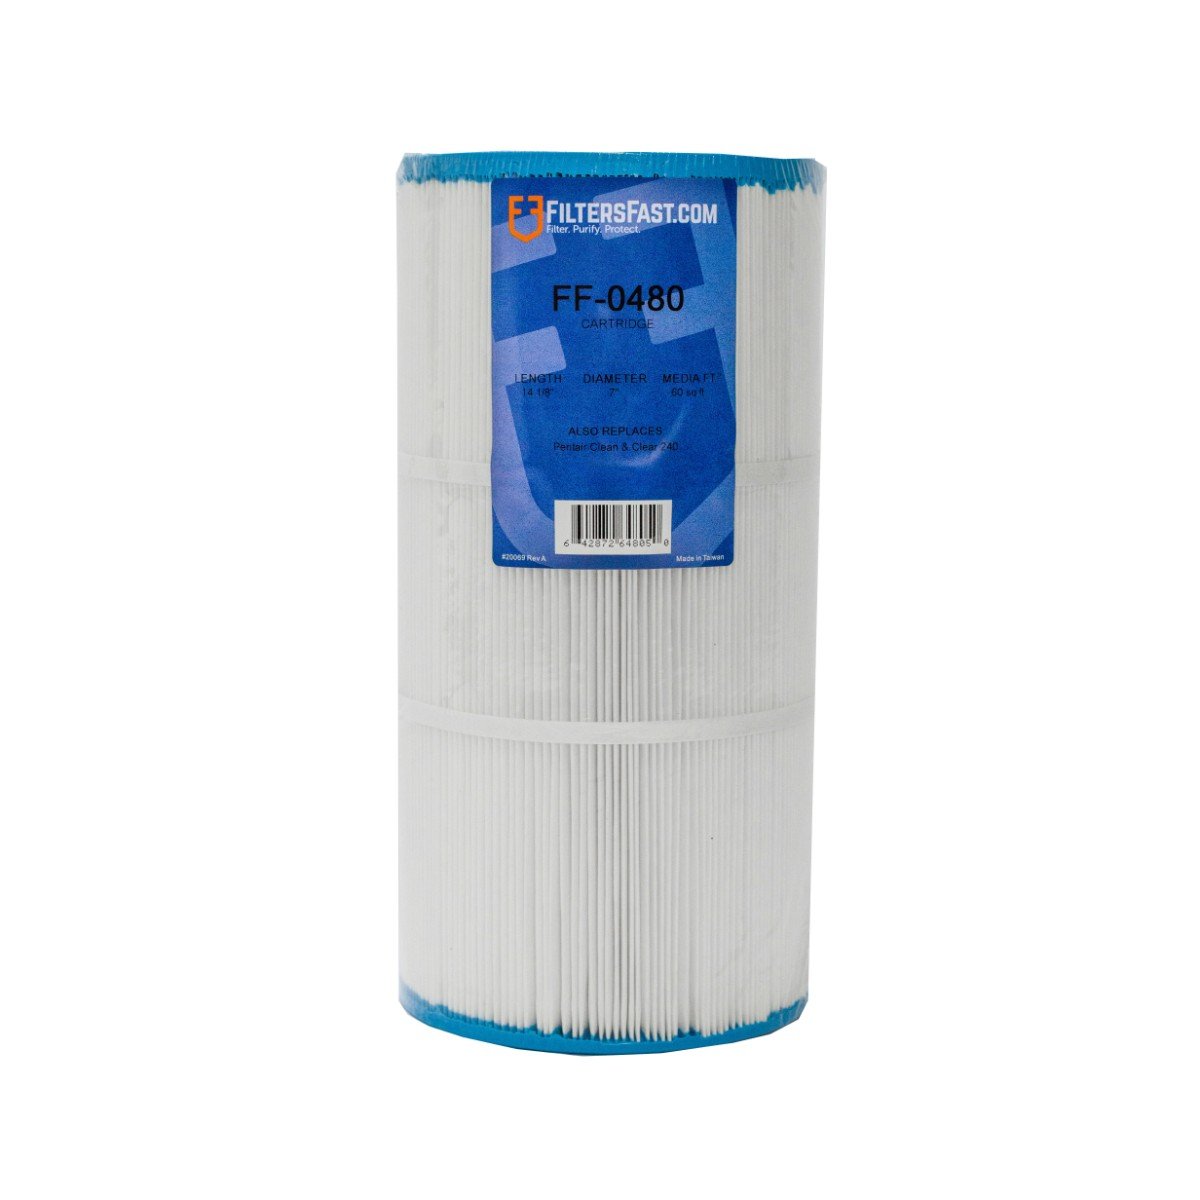 Filters Fast&reg; FF-0480 Replacement Pool & Spa Filter Cartridge